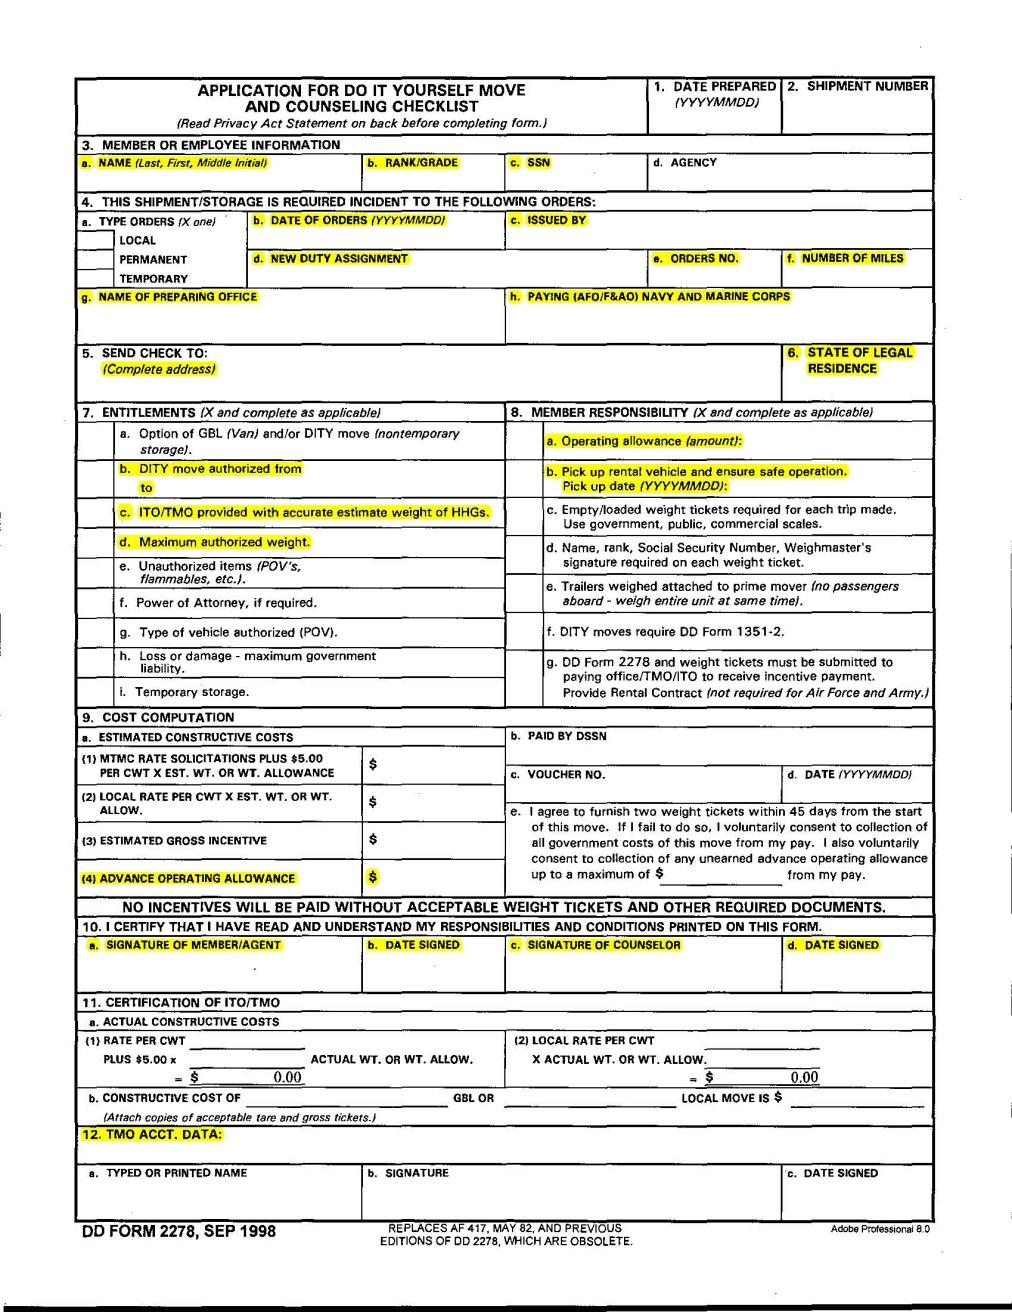 DD FORM 2278 Obtained via www.move.